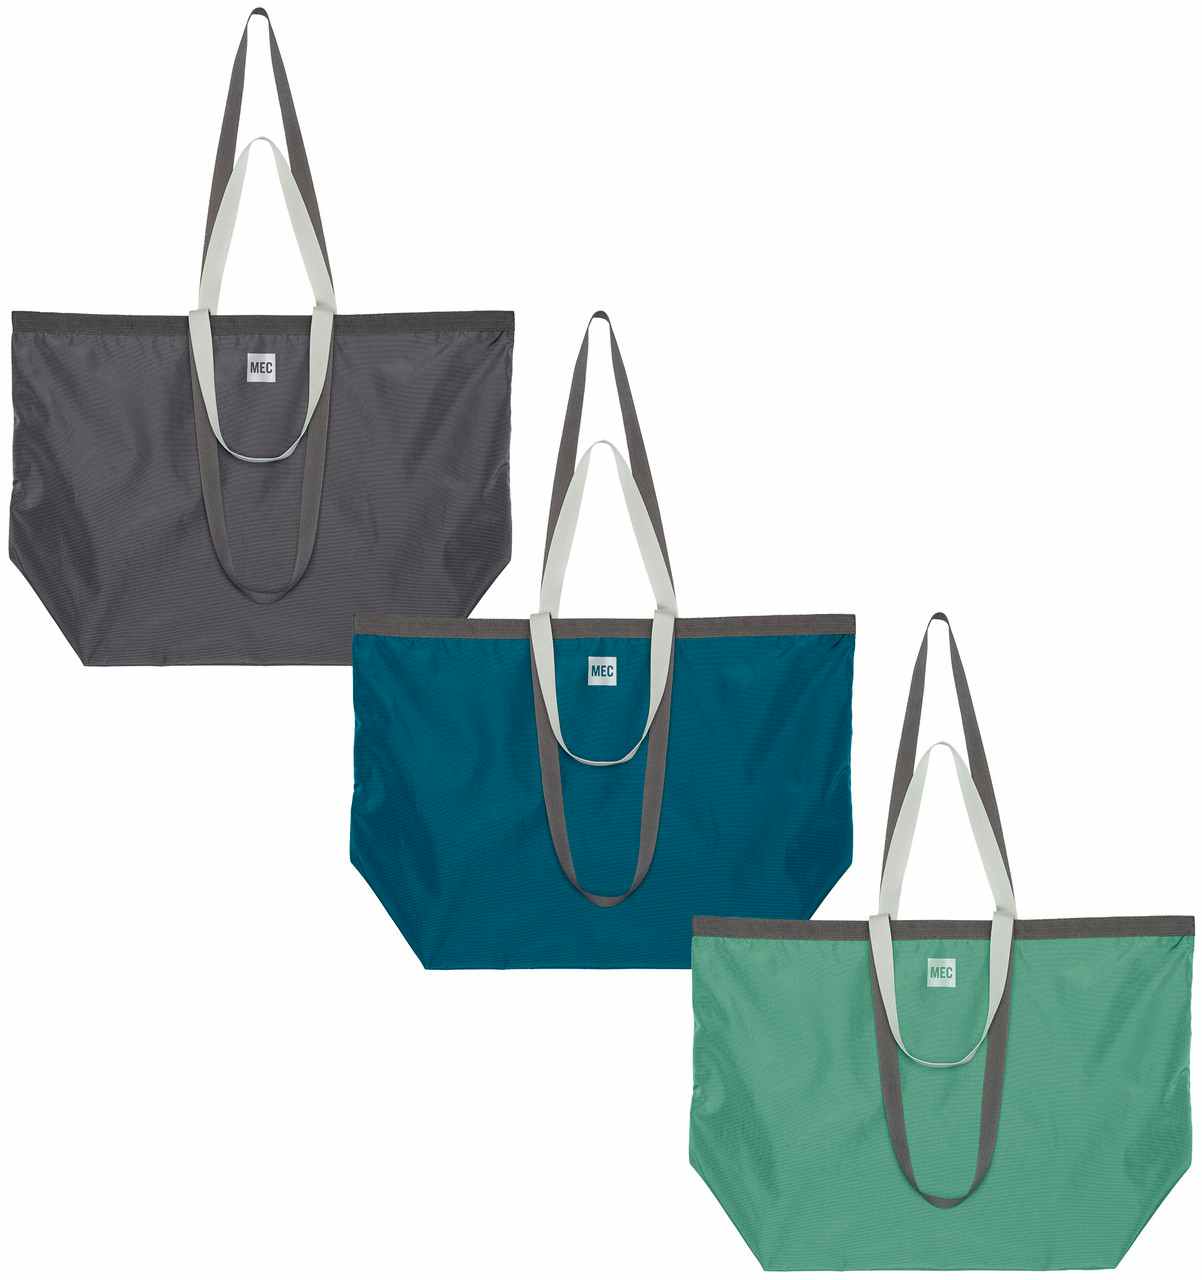 Waste-Less Tote Bag 45L Assorted